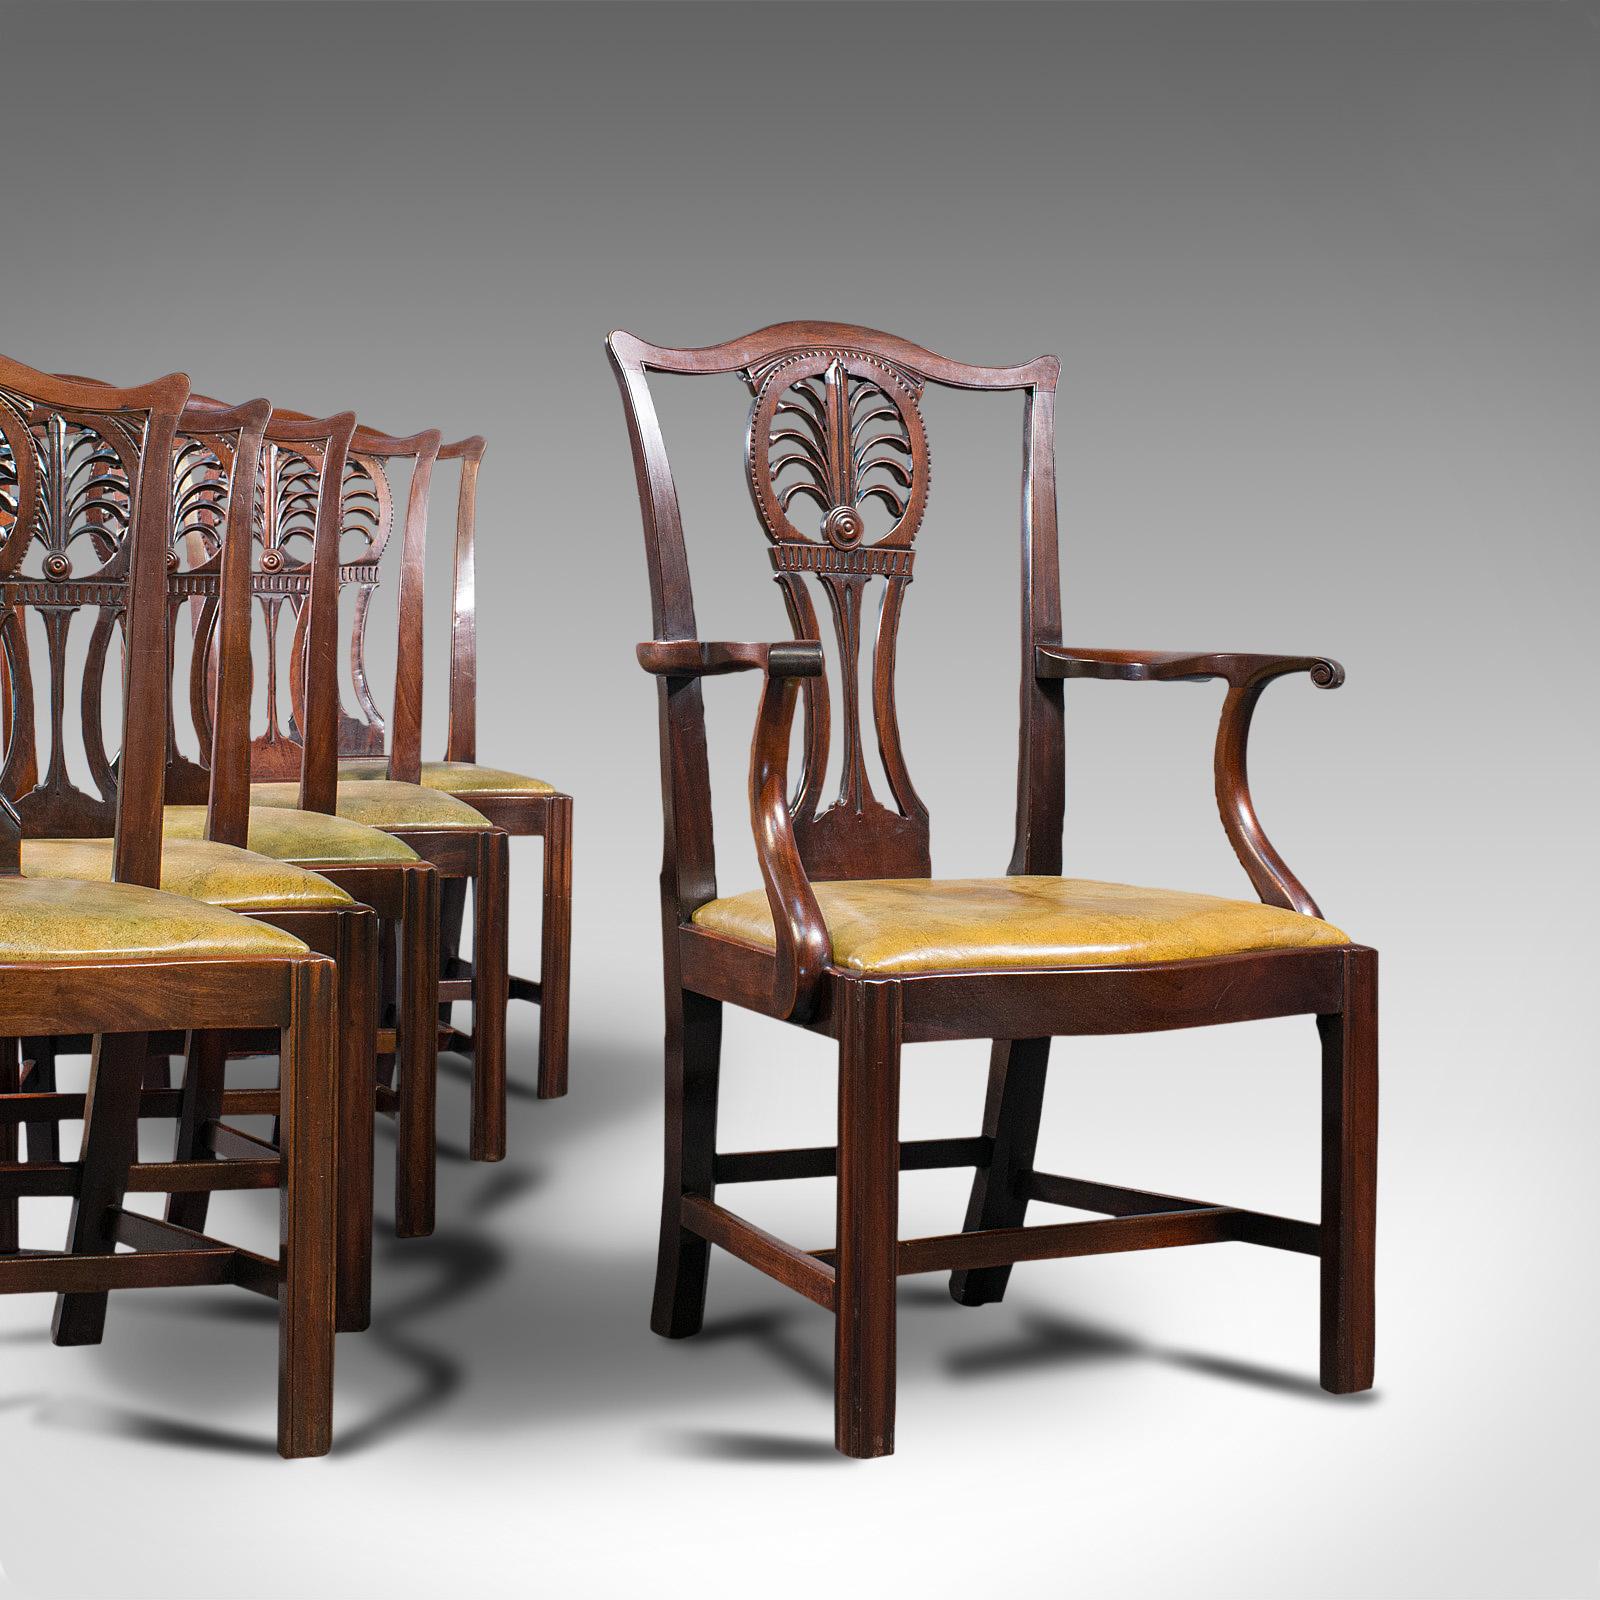 This is an antique set of 6 dining chairs. An English, mahogany and leather King chair and suite of 5 seats, dating to the Early Victorian period, circa 1850.

A dining suite of fine antique distinction
Displaying a desirable aged patina and of